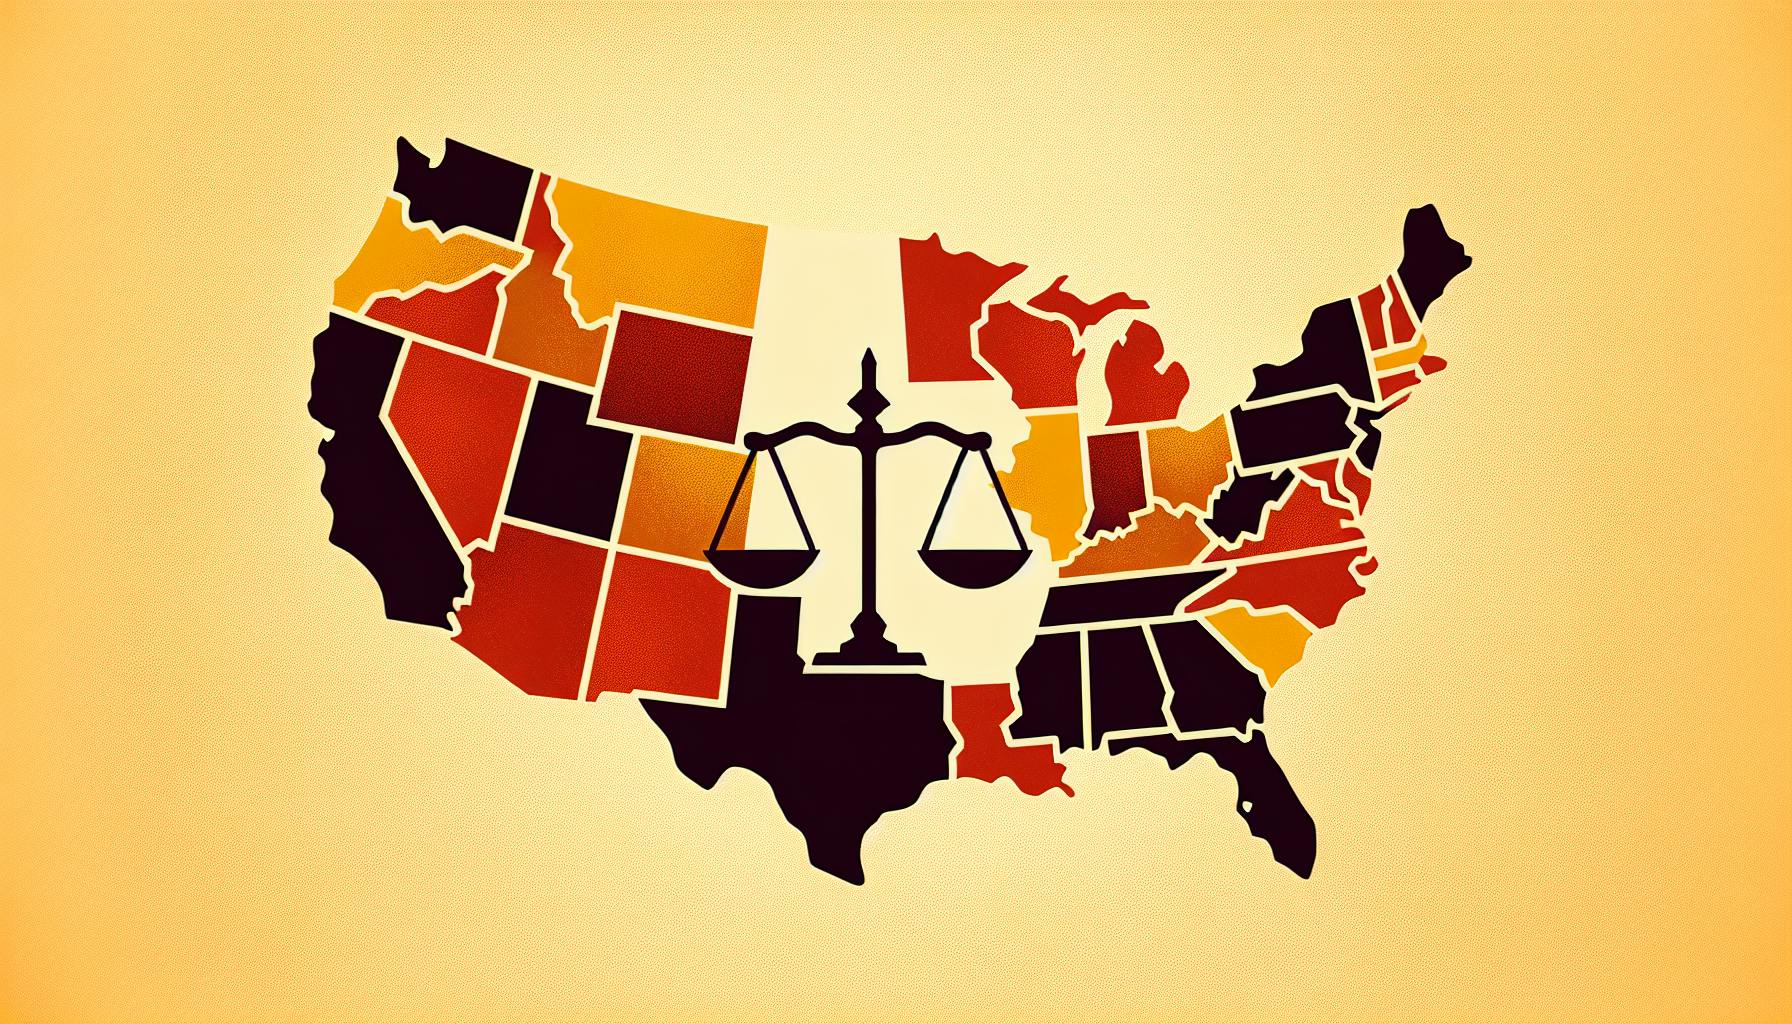 The Tenth Amendment: States' Rights and Powers